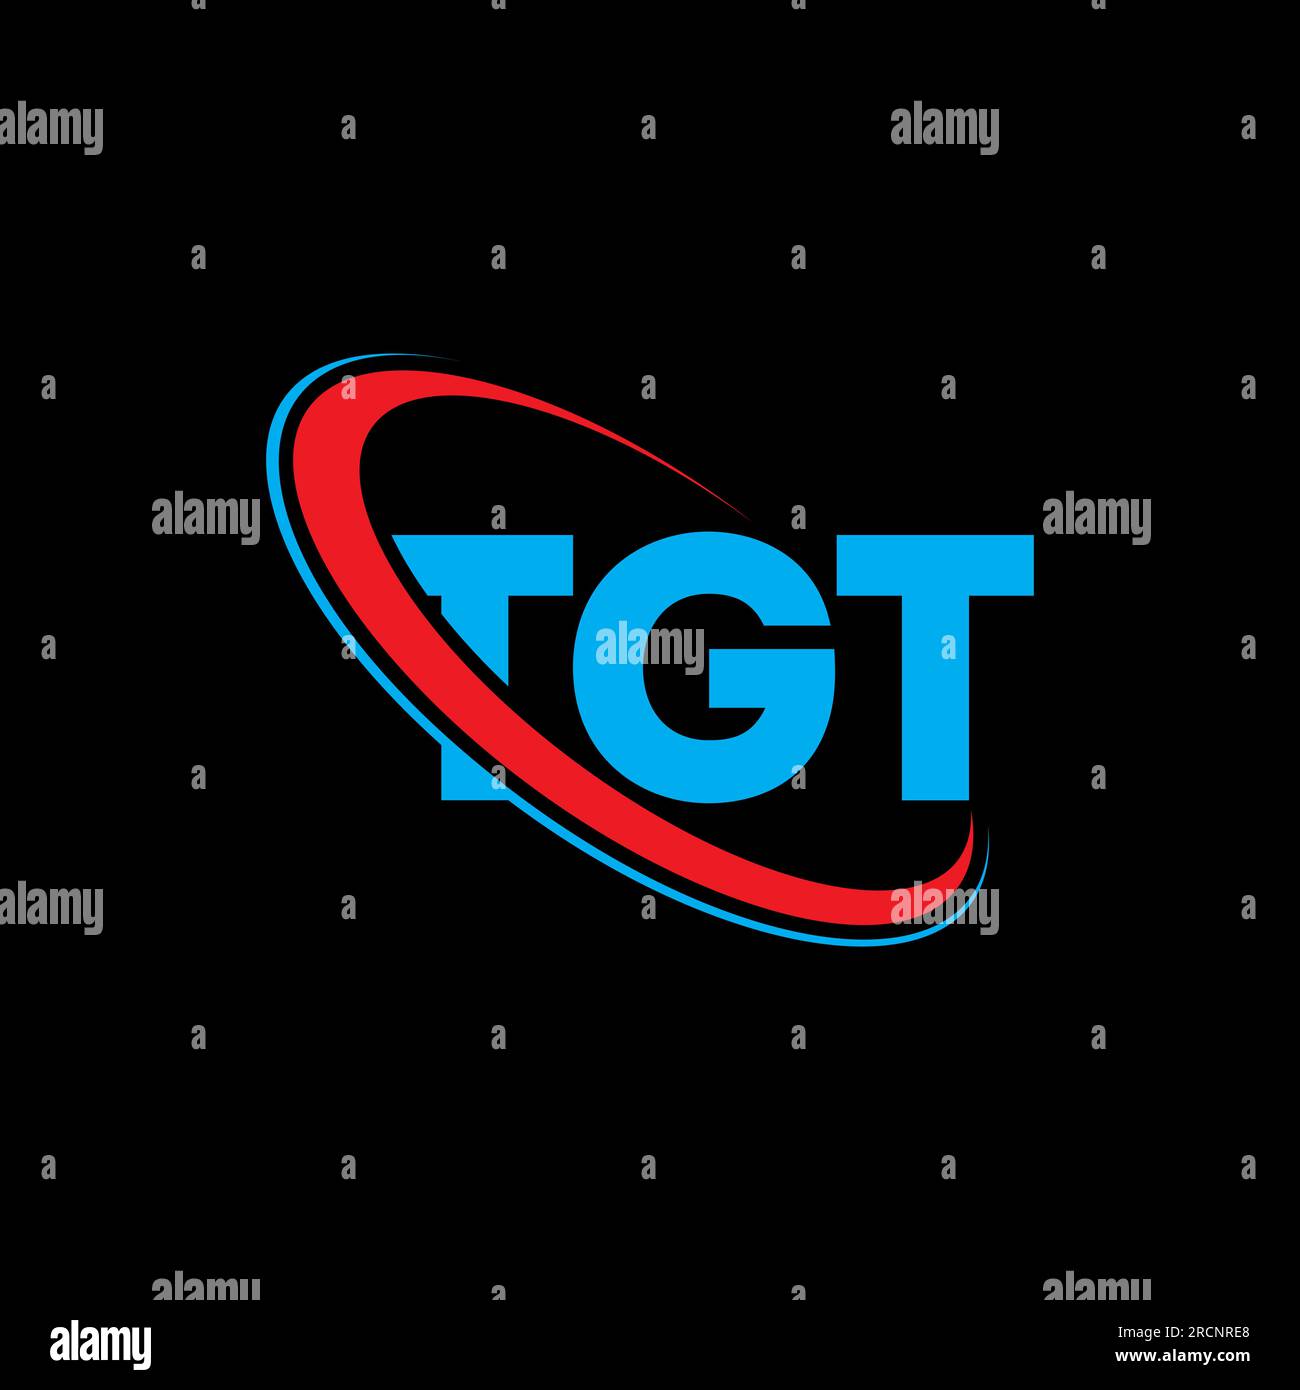 TGT logo. TGT letter. TGT letter logo design. Initials TGT logo linked with circle and uppercase monogram logo. TGT typography for technology, busines Stock Vector